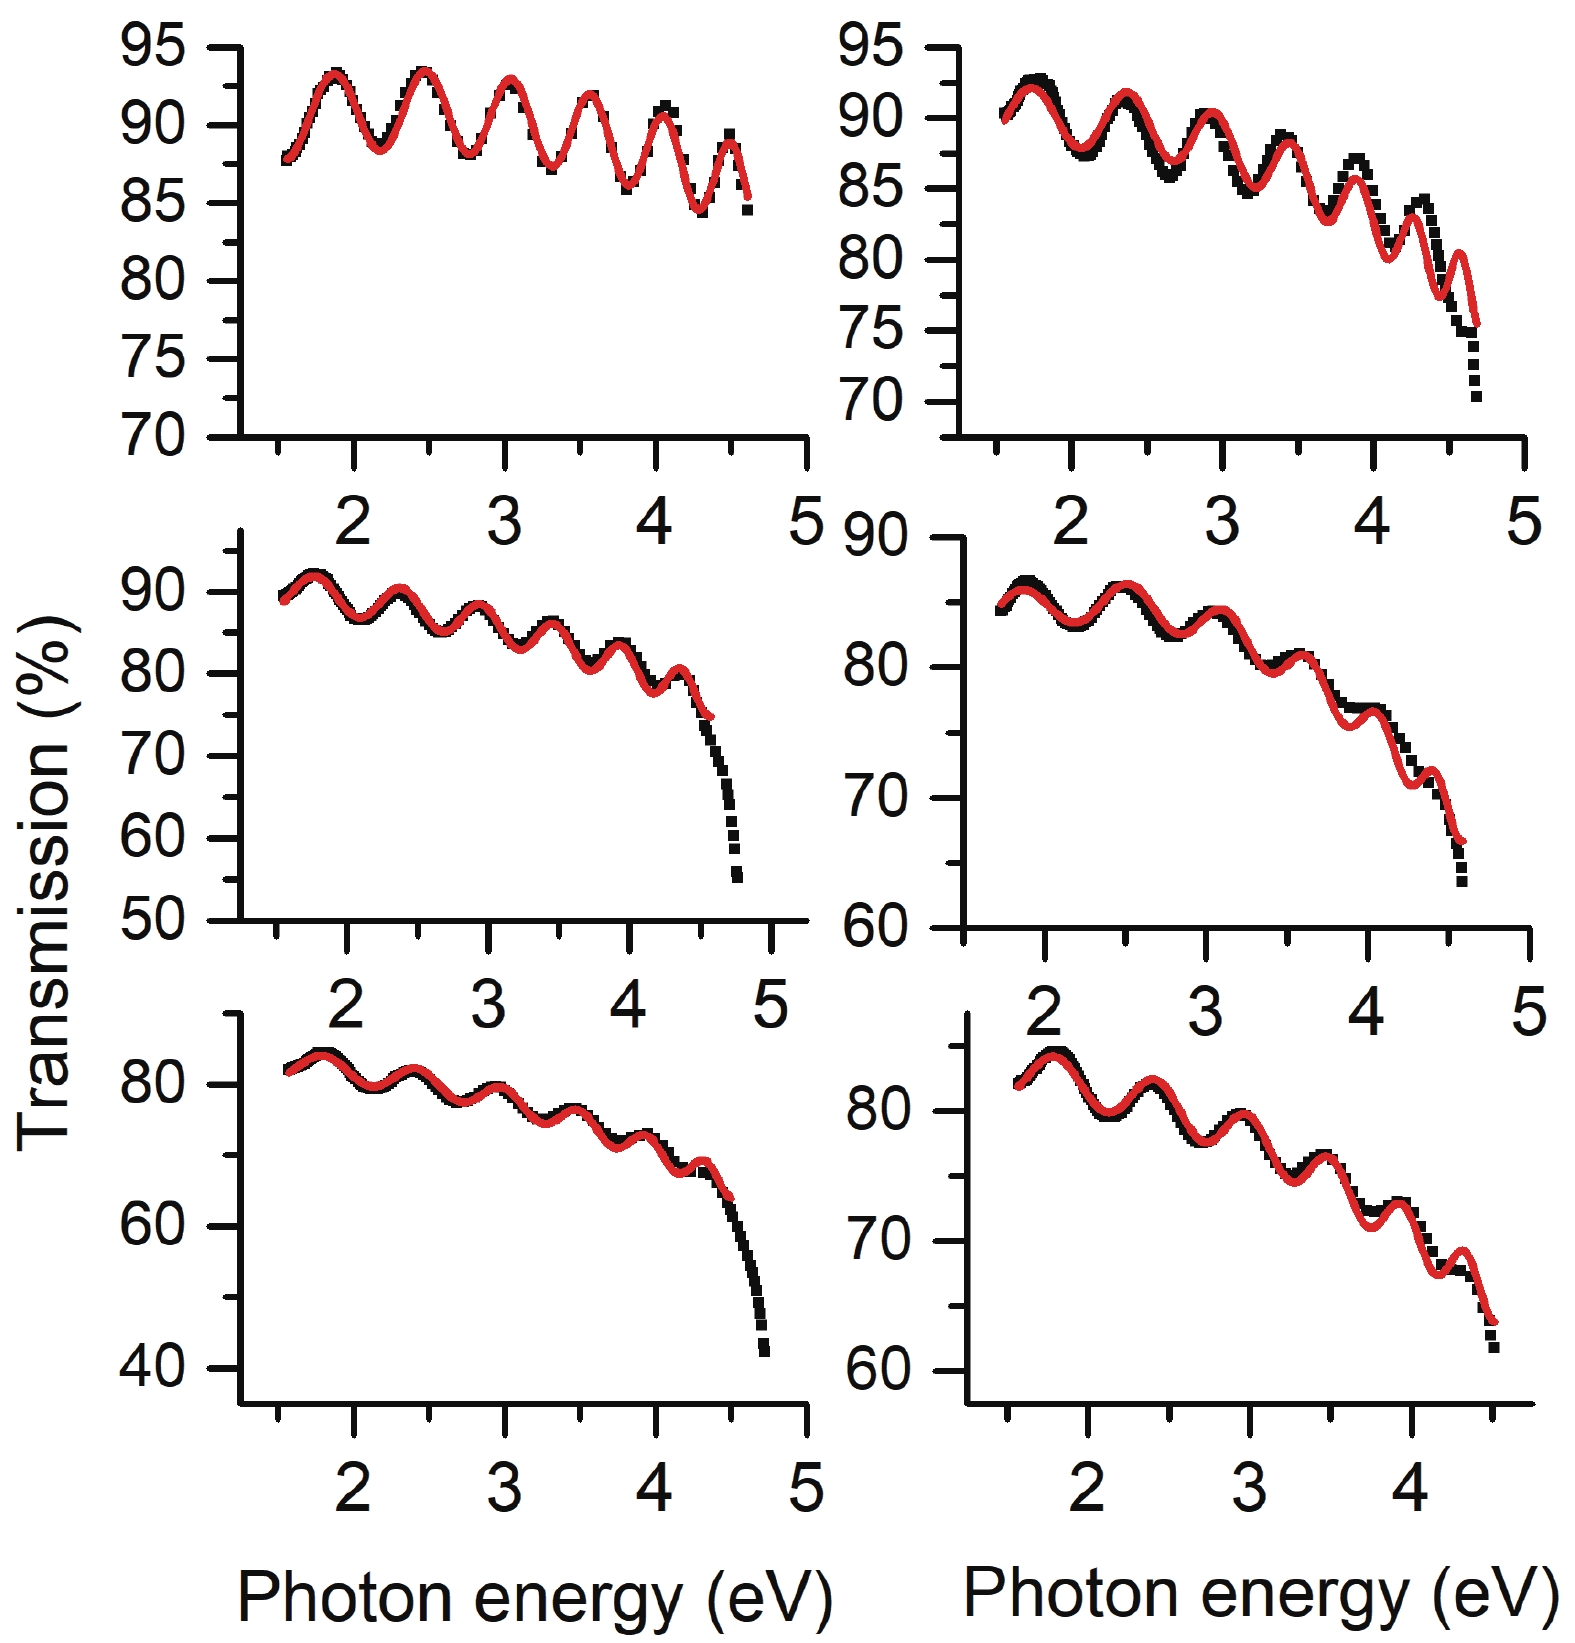 (Color online) The measured transmission spectra (solid squares) and corresponding fitting curves (red solid lines) of the β-Ga2O3 thin films. The experimental spectra were measured by Hu et al.[4], while the fitting curves were obtained with Eq. (2) described in the text.